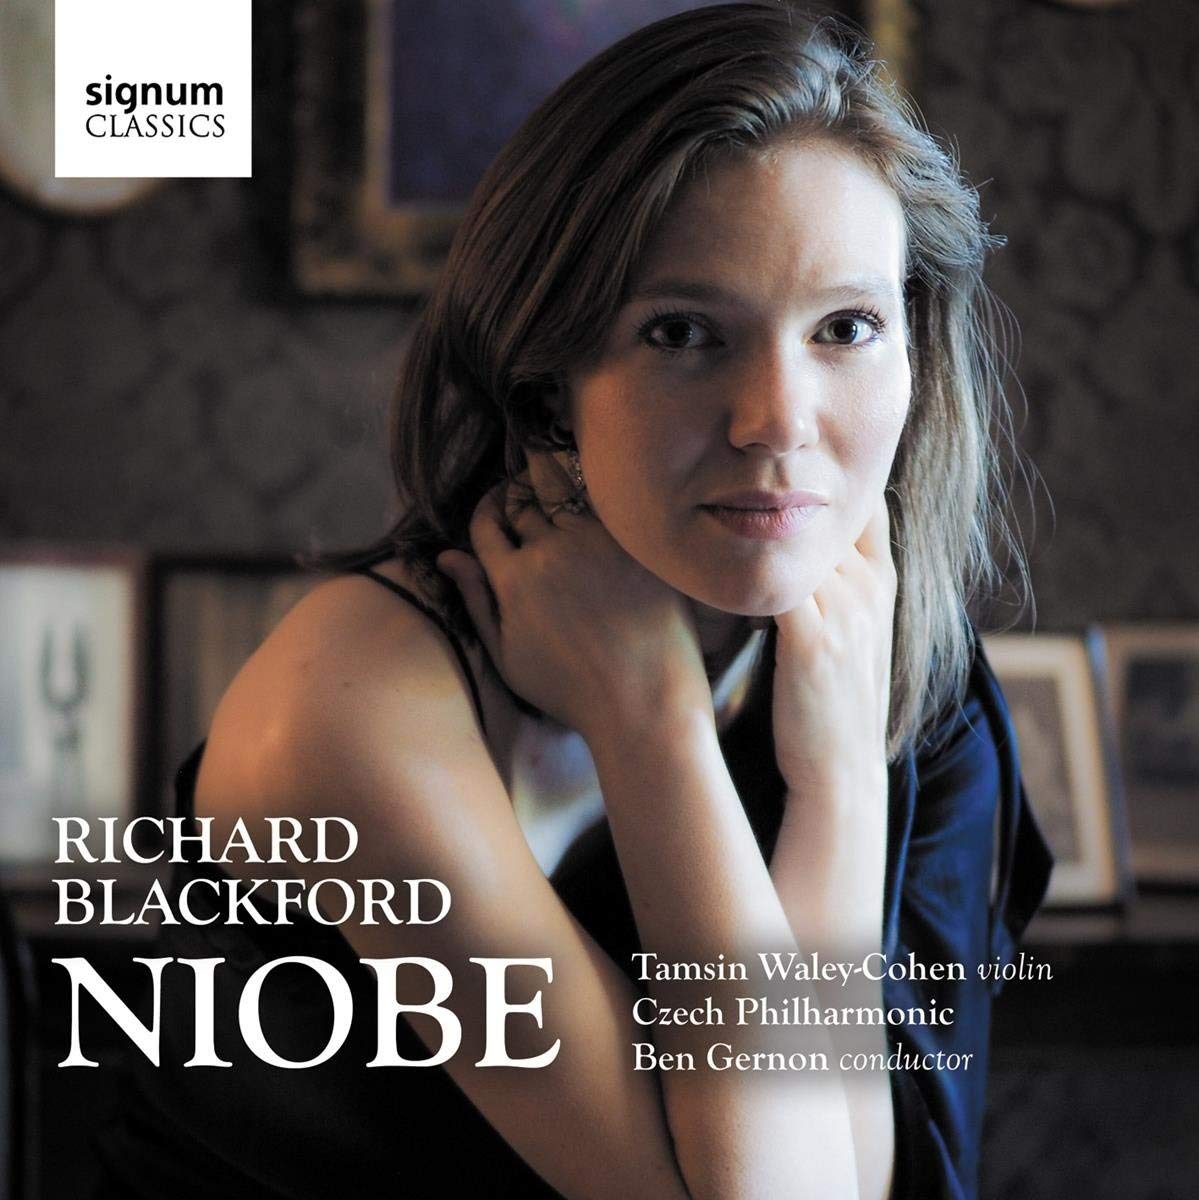 A significant achievement: #RichardBlackford's Niobe with @TamsinWaleyCohe @CzechPhil @GernonBen on @SignumRecords. My CD review:
planethugill.com/2018/07/richly…